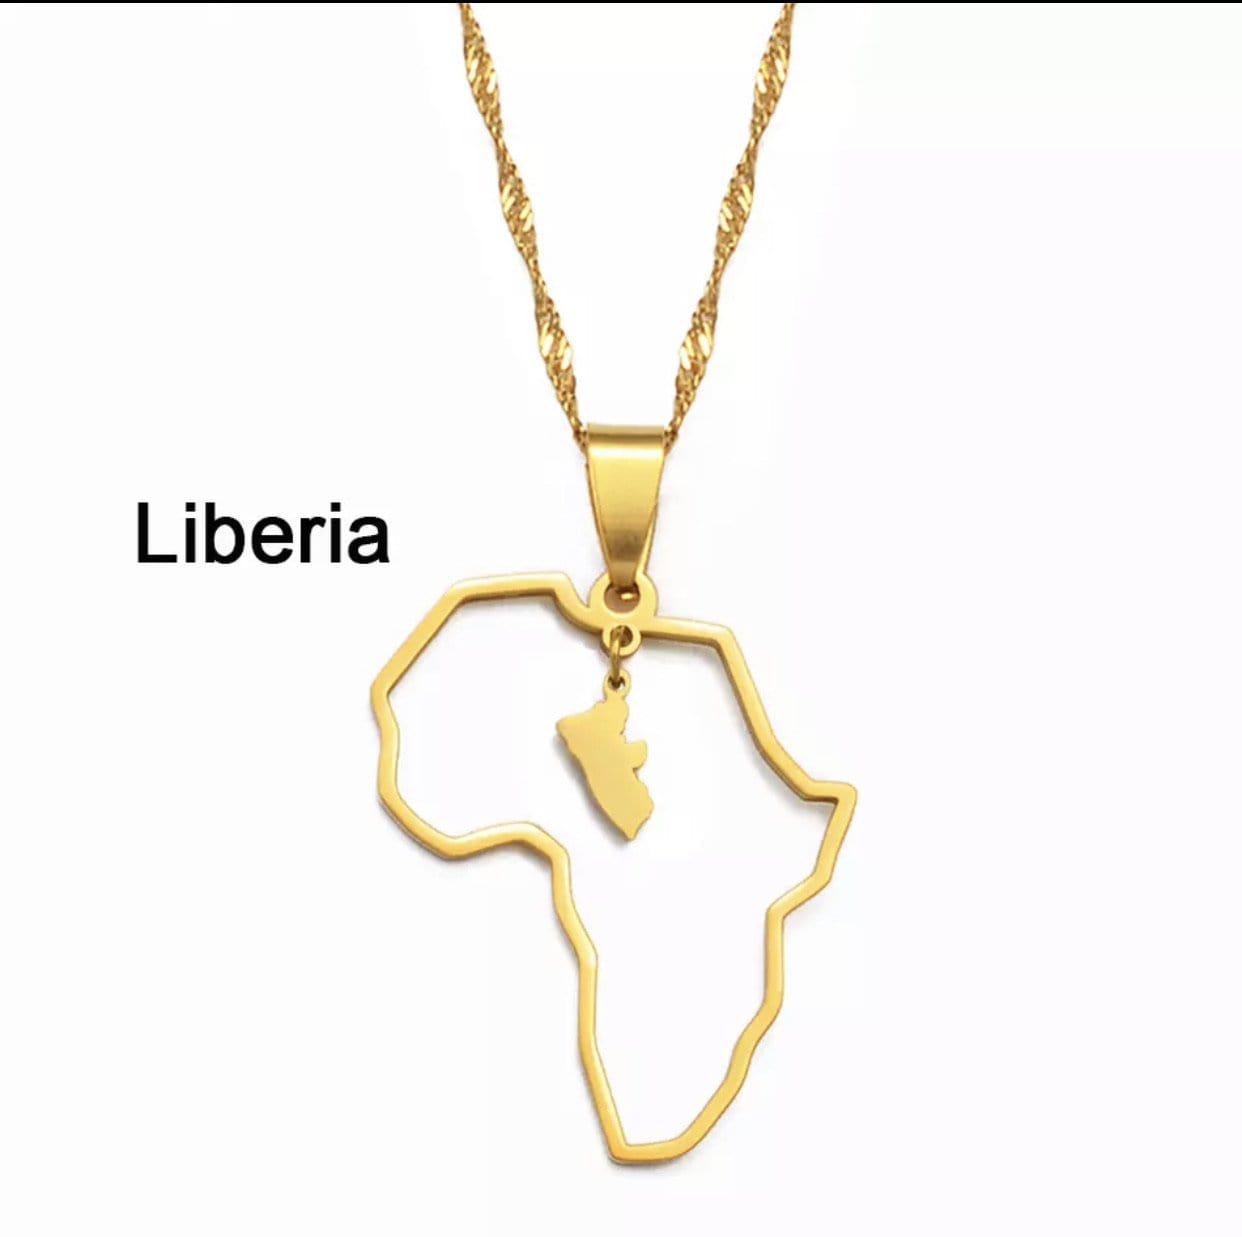 Veryldesigns Necklace Liberia Custom African country Necklace